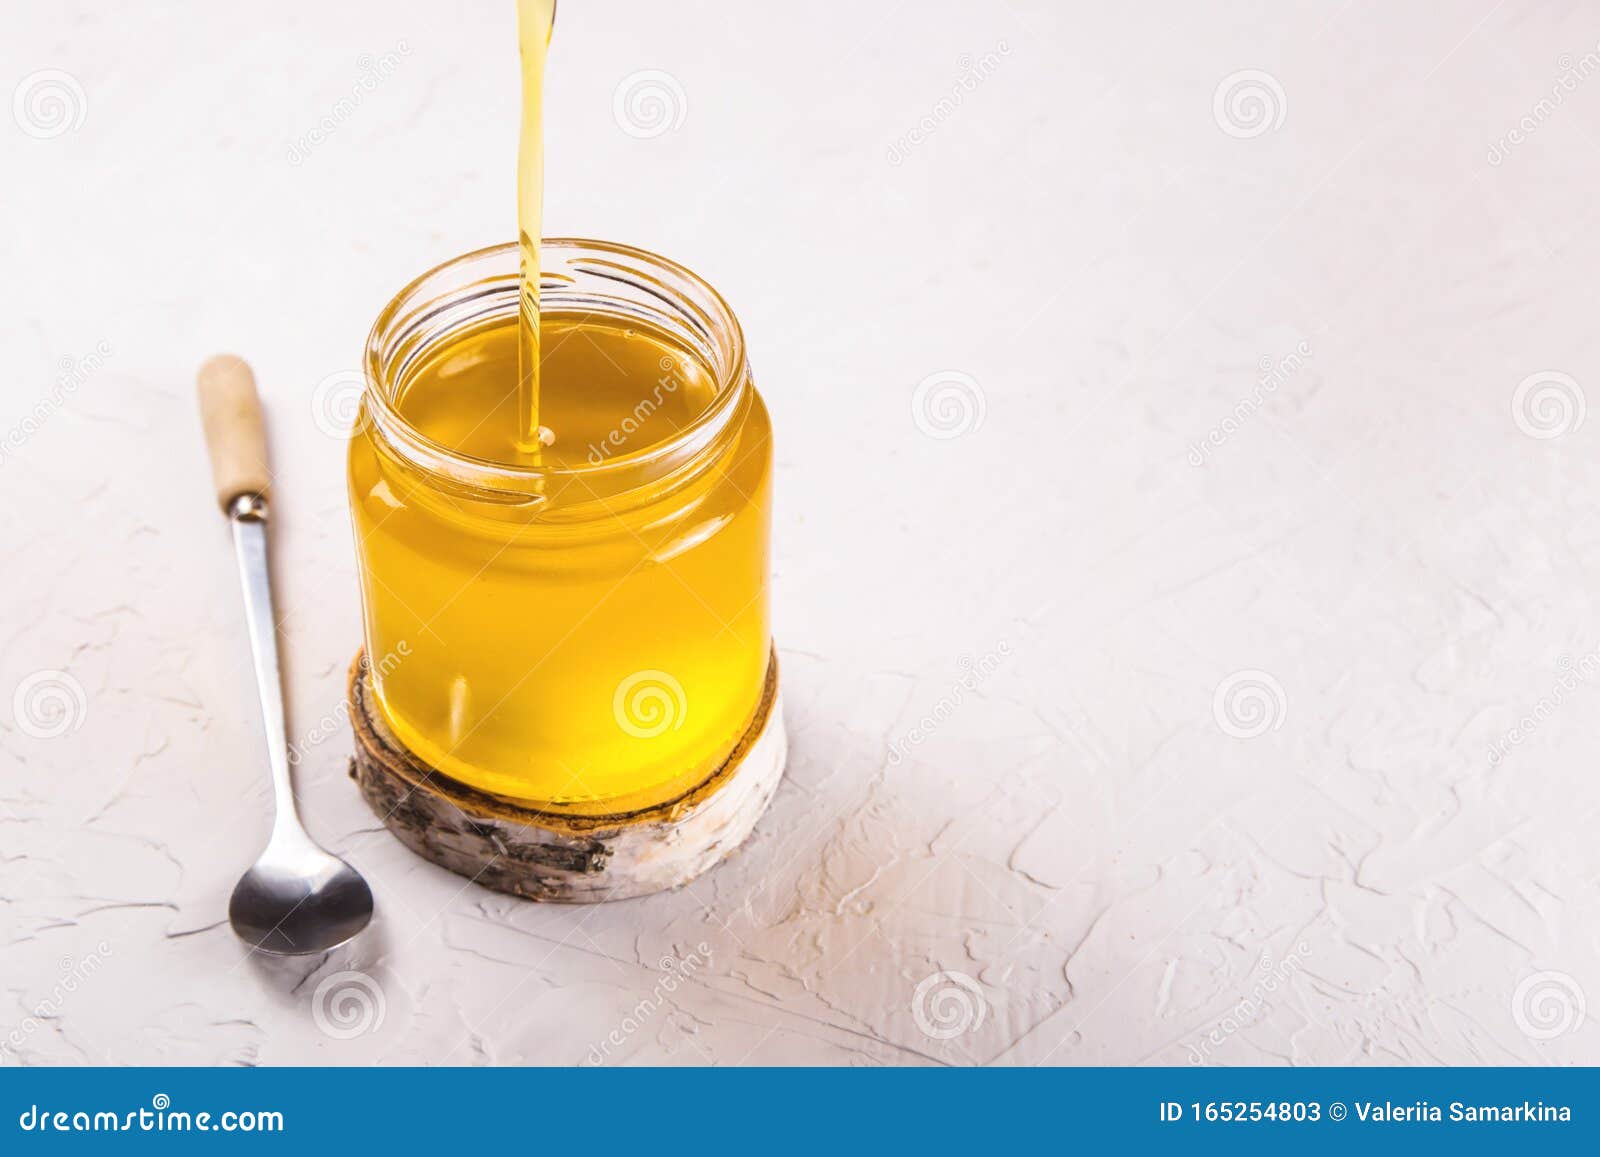 Download Homemade Liquid Ghee Or Clarified Butter In Transparent Jar Stock Image Image Of Butter Culture 165254803 Yellowimages Mockups